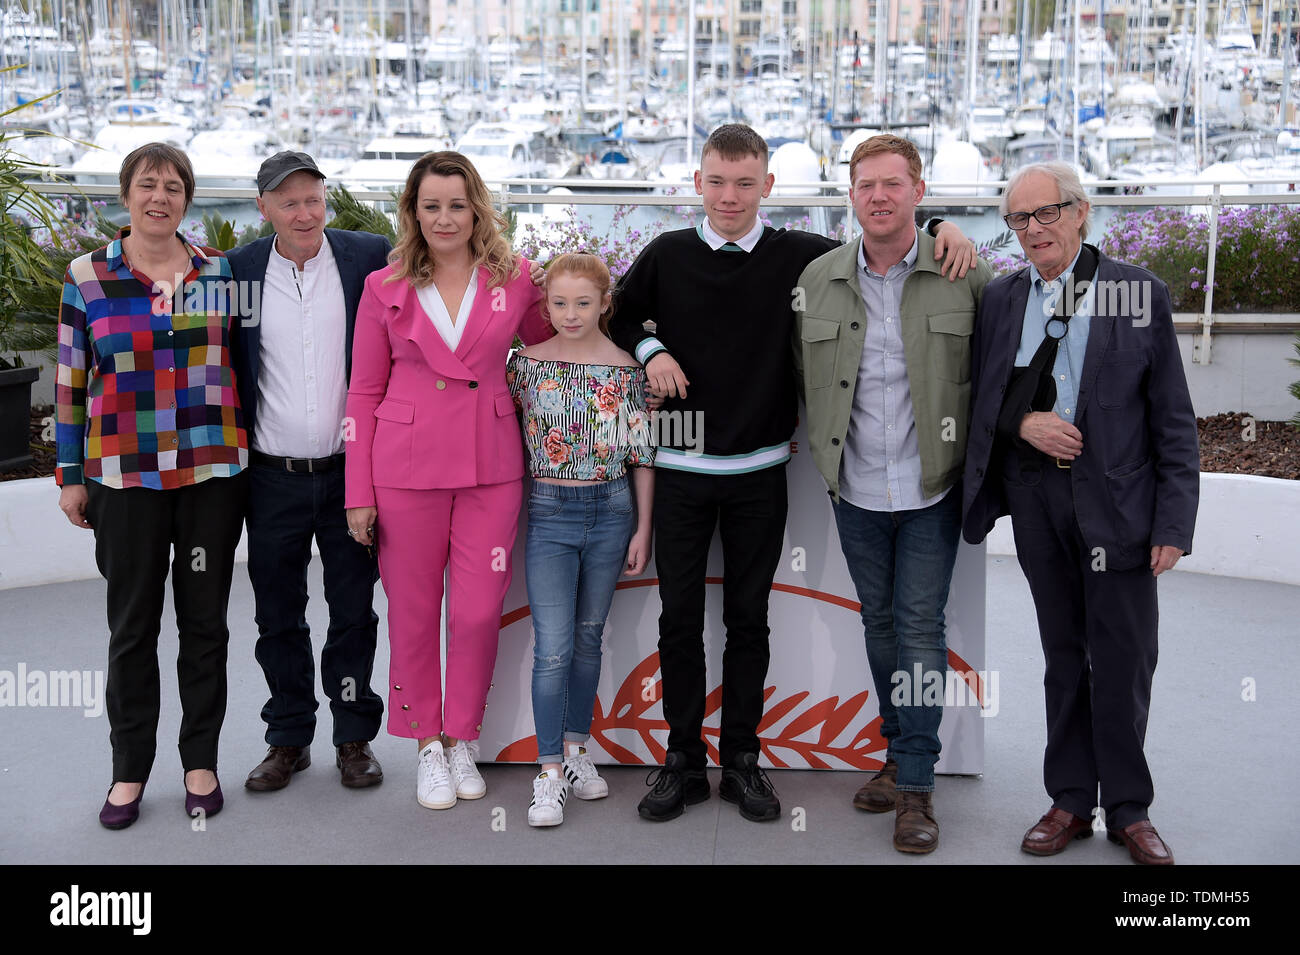 72nd Cannes Film Festival 2019, Photocall film : Sorry, we missed you Pictured: Ken Loach, Kris Hitchen, Debbie Honeywood, Rhys Stone, Katie Proctor, Paul Laverty, Rebecca Oâ€™Brien  Where: Cannes, France When: 17 May 2019 Credit: IPA/WENN.com  **Only available for publication in UK, USA, Germany, Austria, Switzerland** Stock Photo